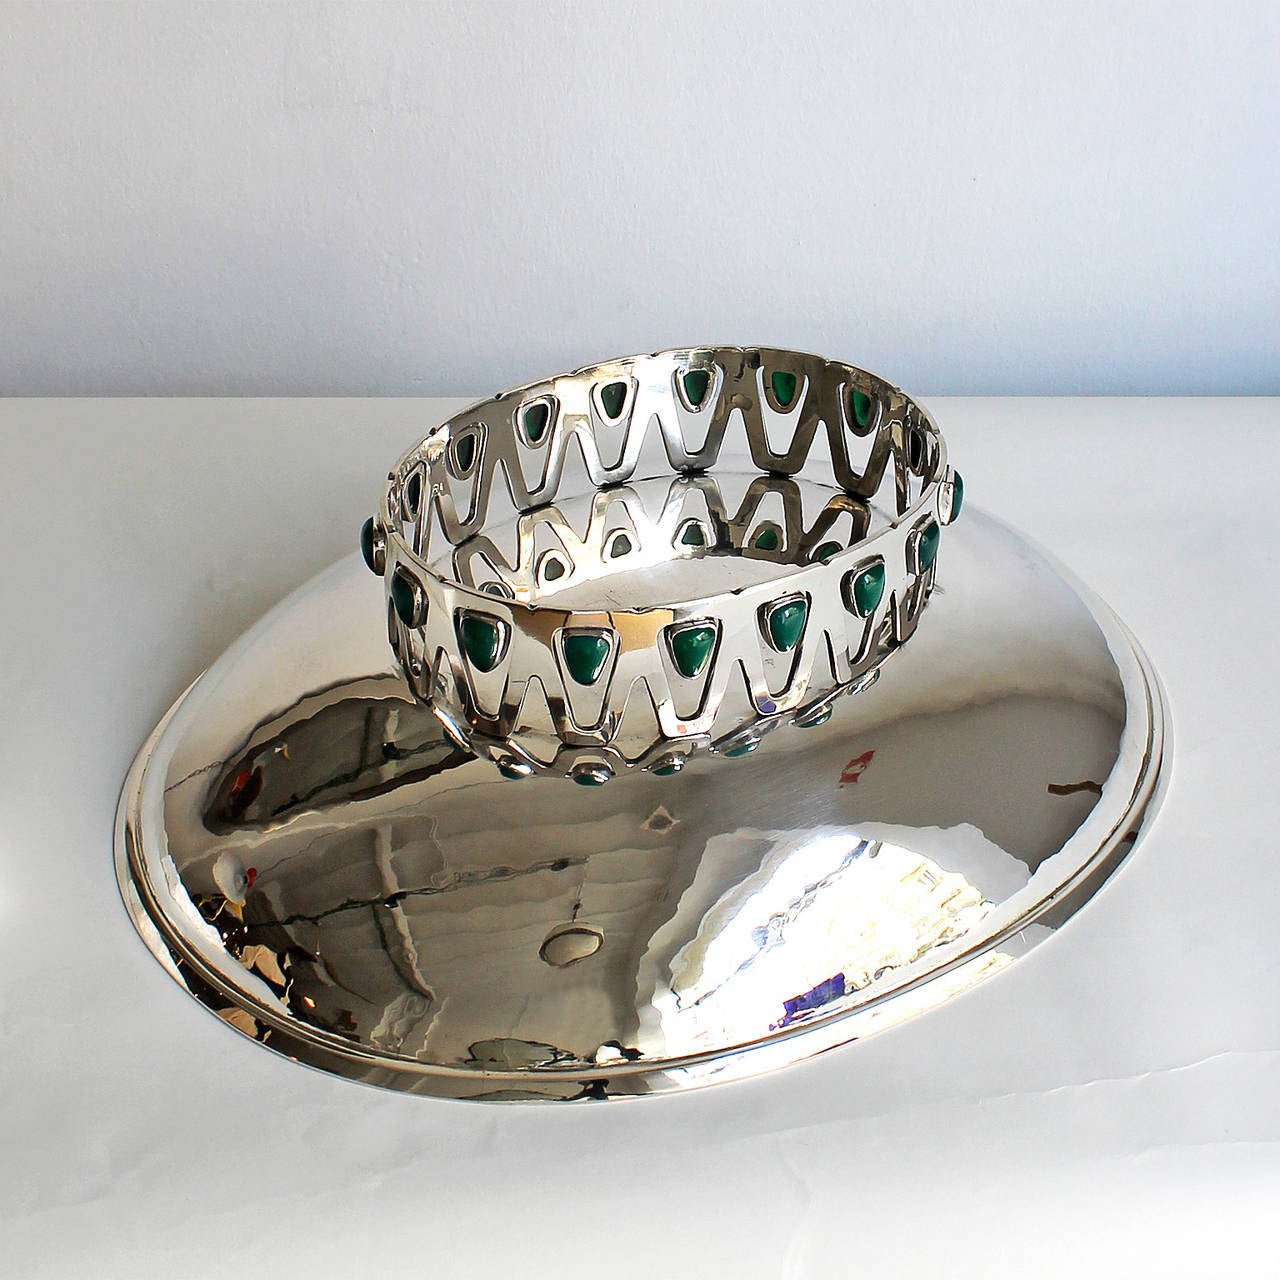 Mid-20th Century Sterling Silver Centerpiece by Serrahima